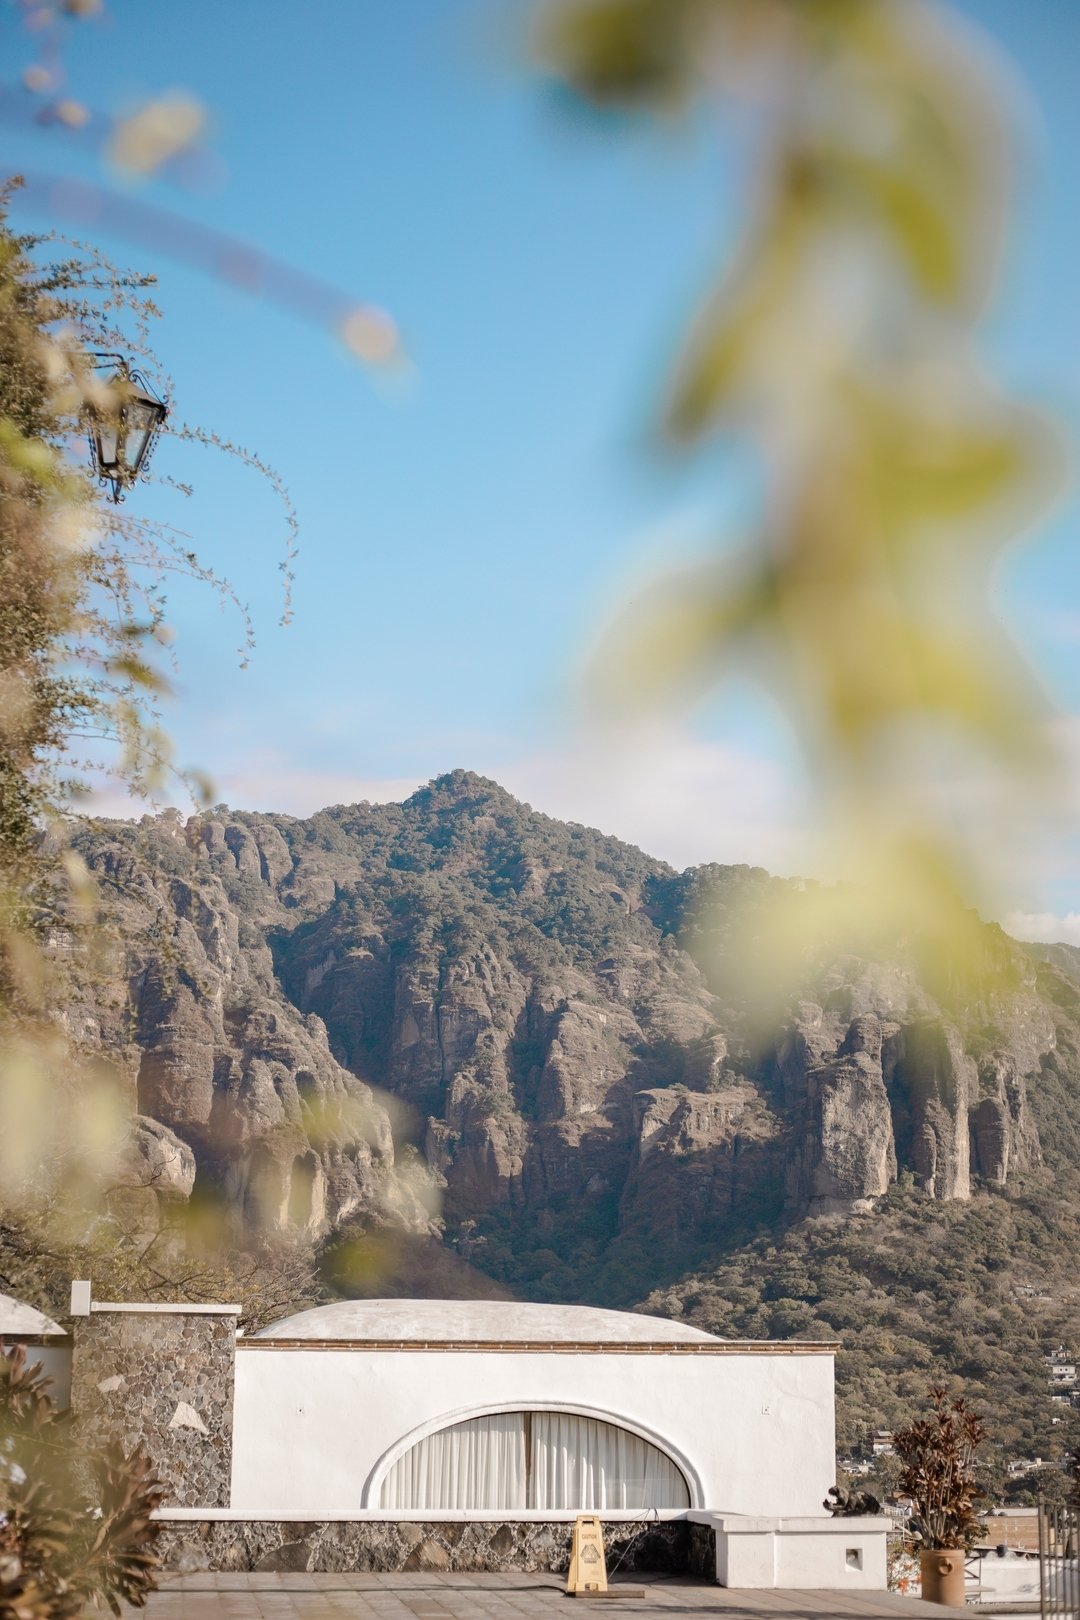 #MindfulTravels One of the most magical places I've visited in Mexico is Tepoztl&aacute;n.

Nestled in the mountains of Morelos, it has long been revered as a spiritual haven, drawing seekers from around the world to its tranquil landscapes and ancie